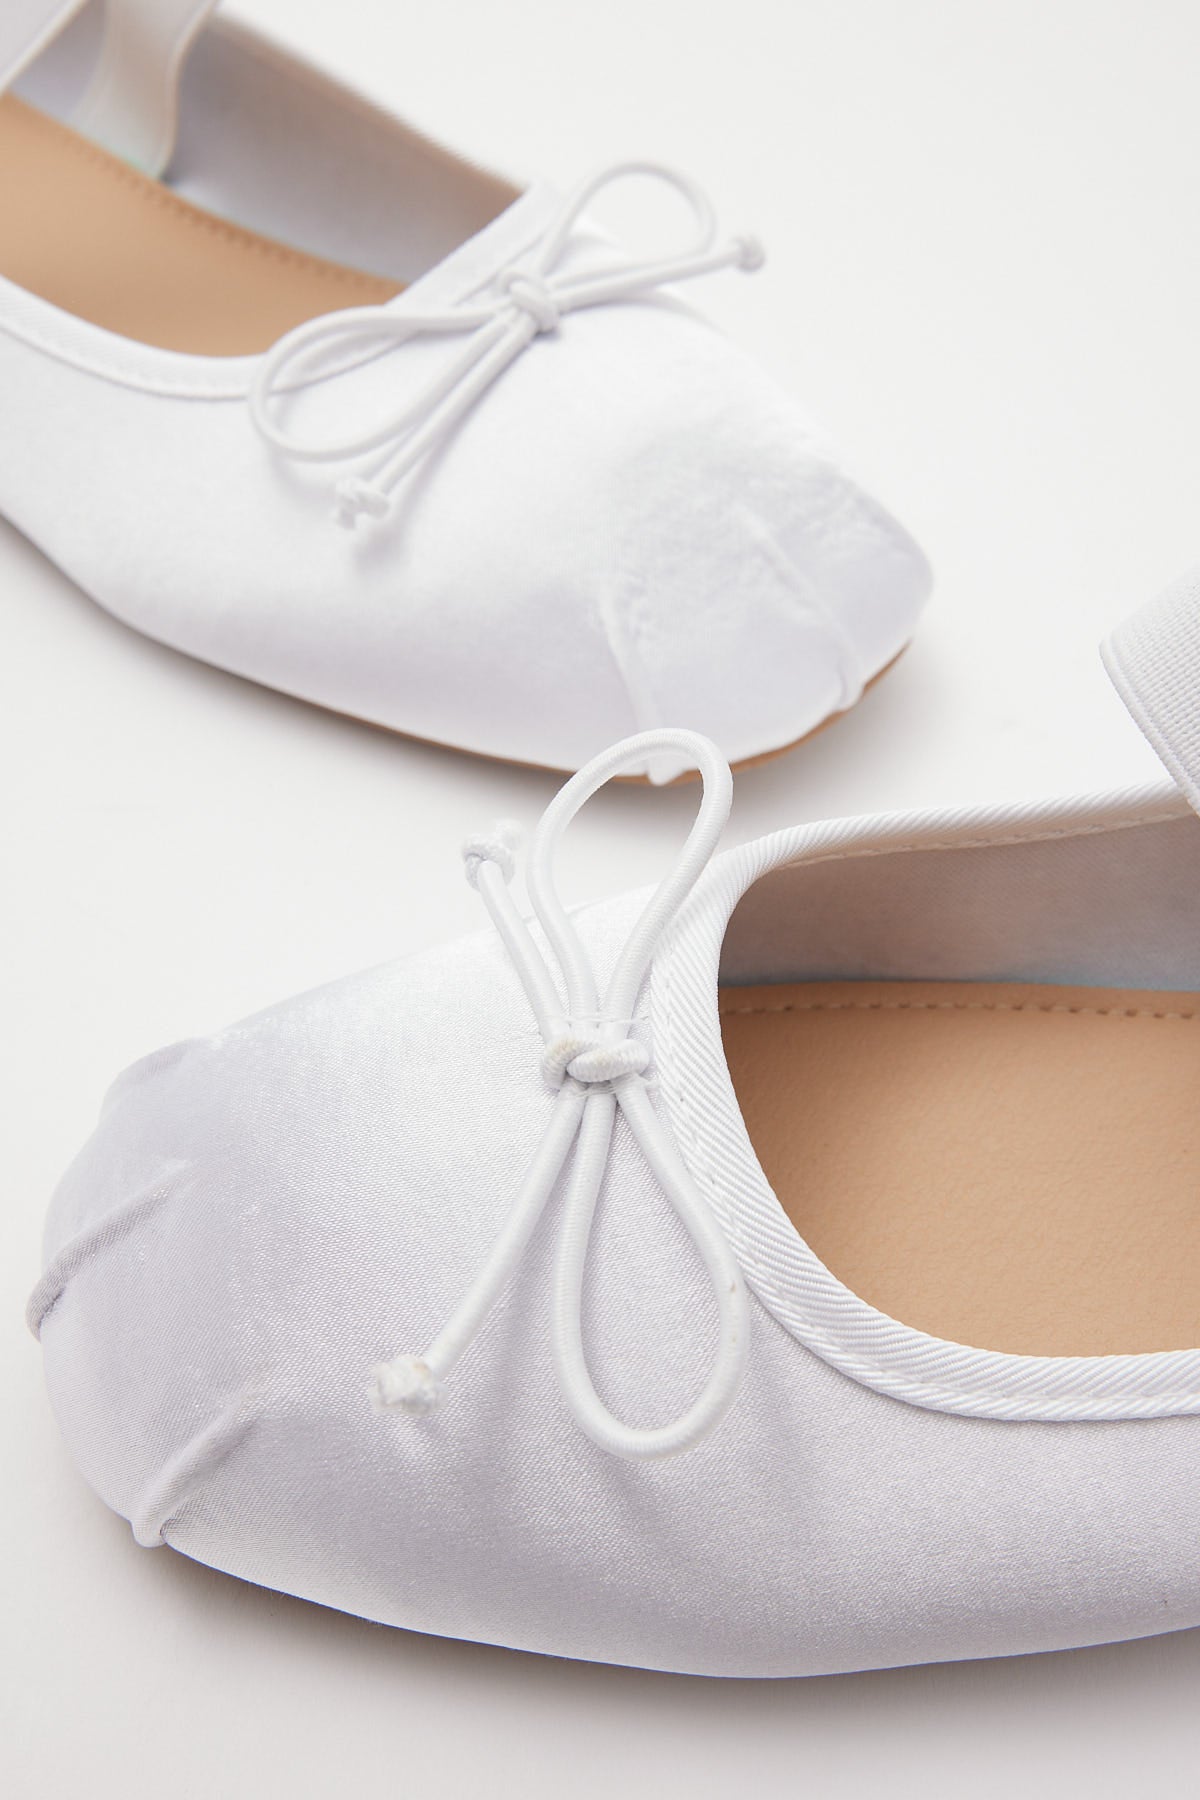 Therapy Mystic Ballet Flat Pearl Satin